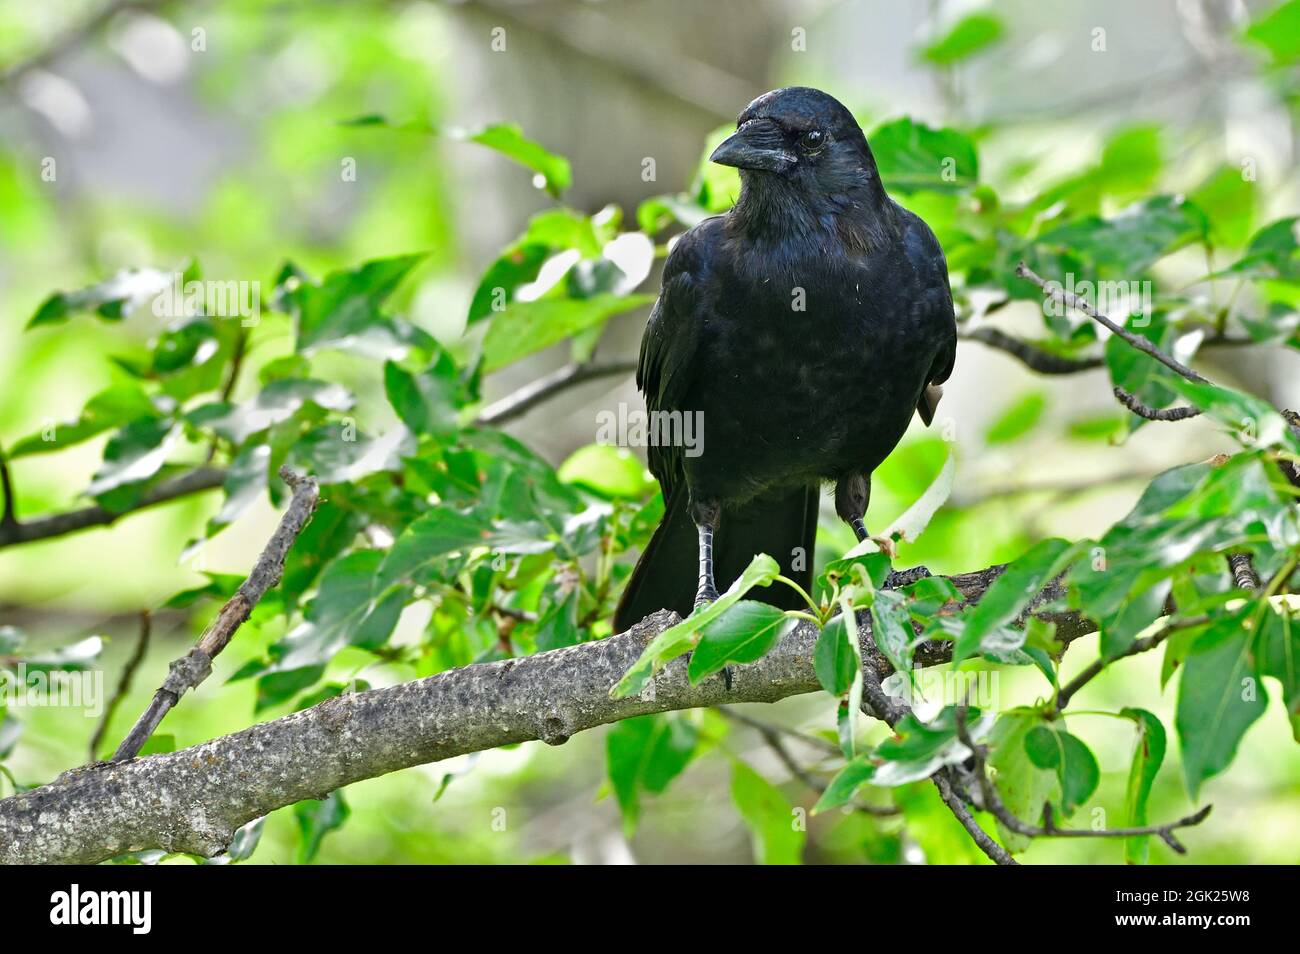 A common crow 'Corvus brachyrhynchos', perched on a poplar tree branch with green leaves in rural Alberta Canada. Stock Photo